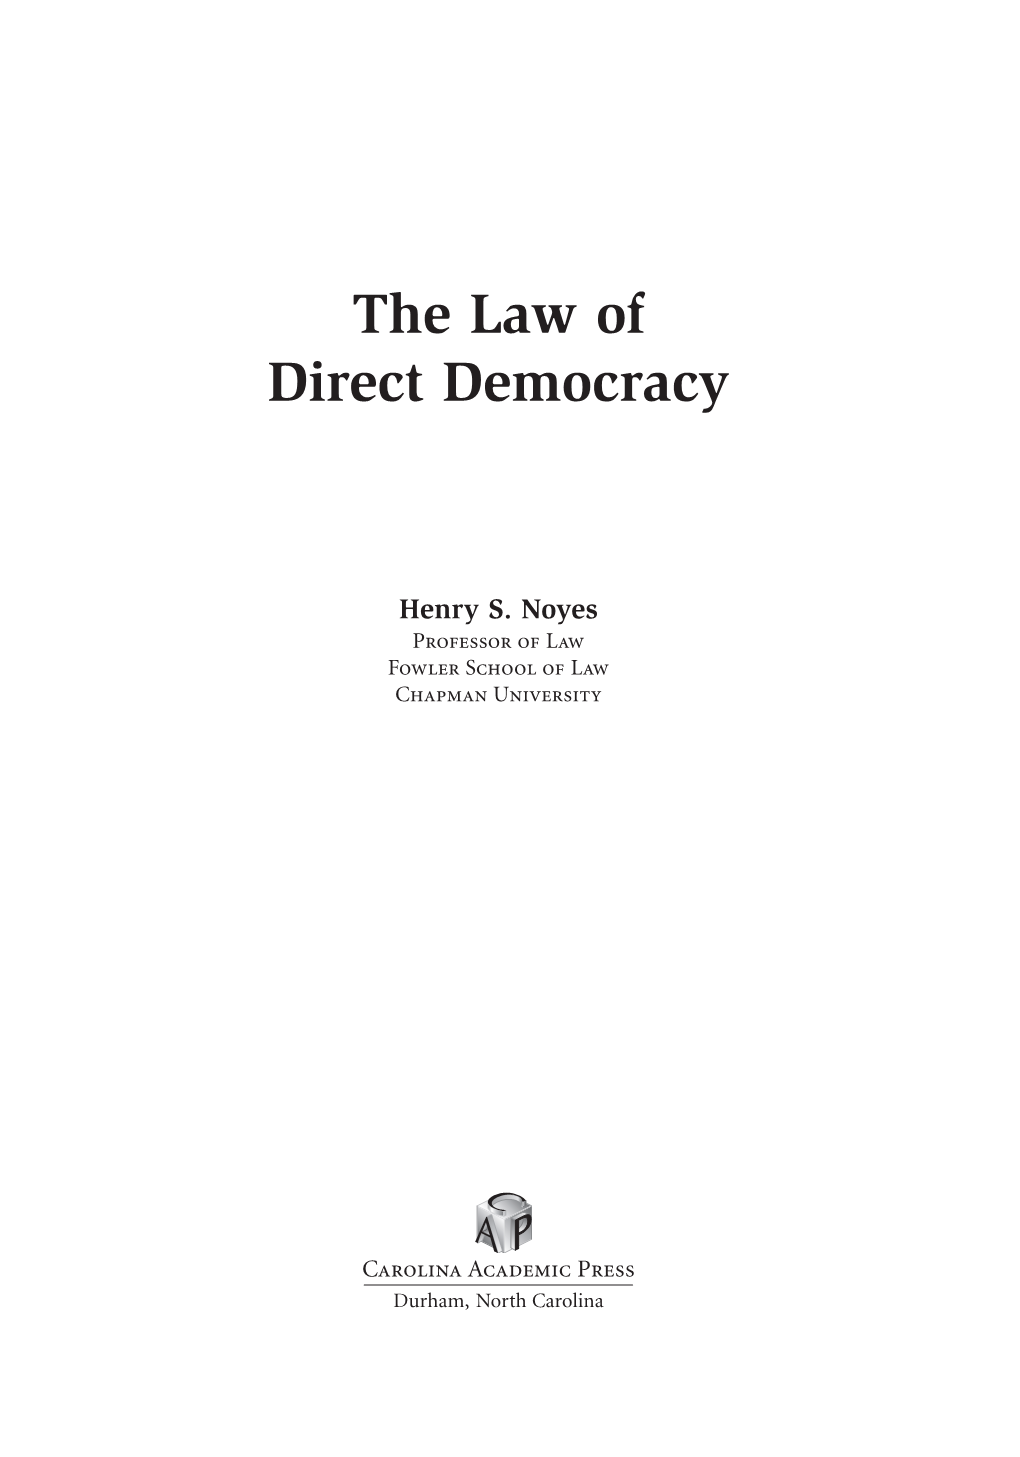 The Law of Direct Democracy